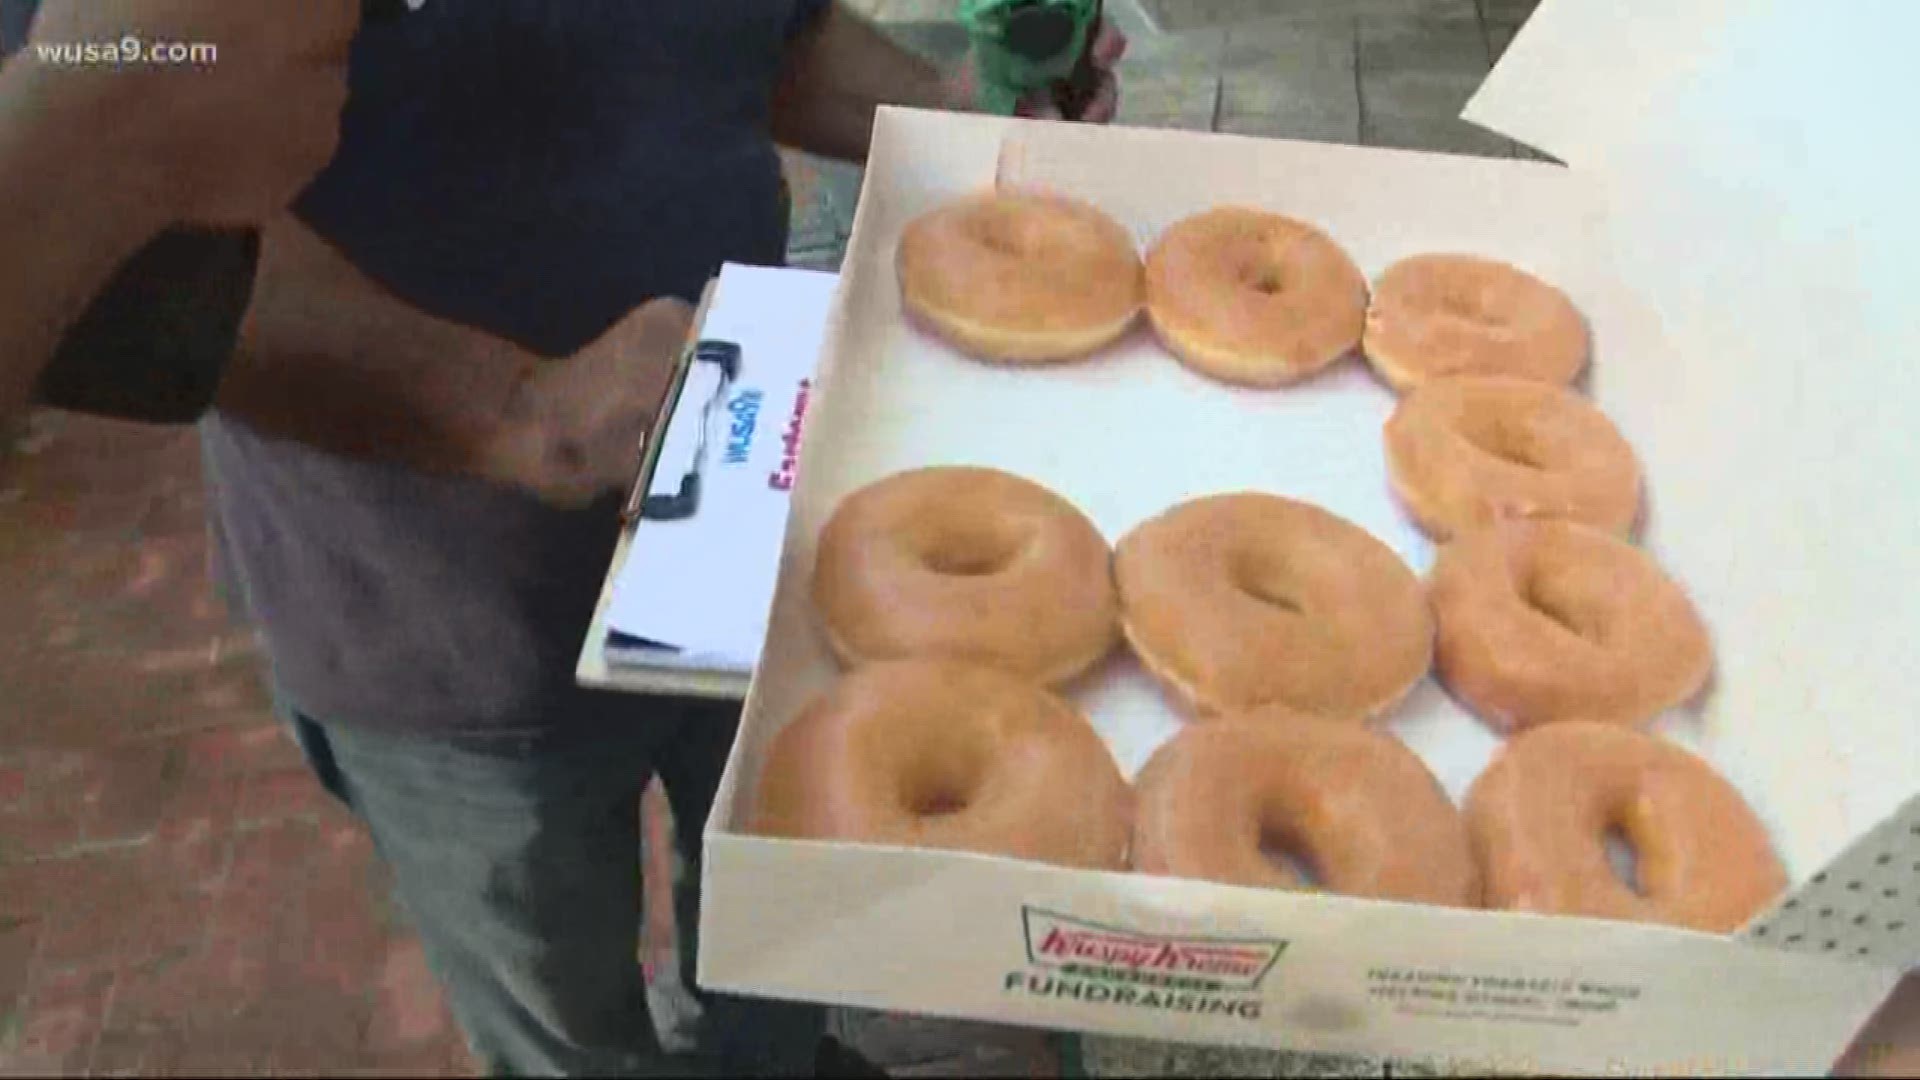 We're here to make your day better. We are giving out doughnuts and dinero. Enjoy!